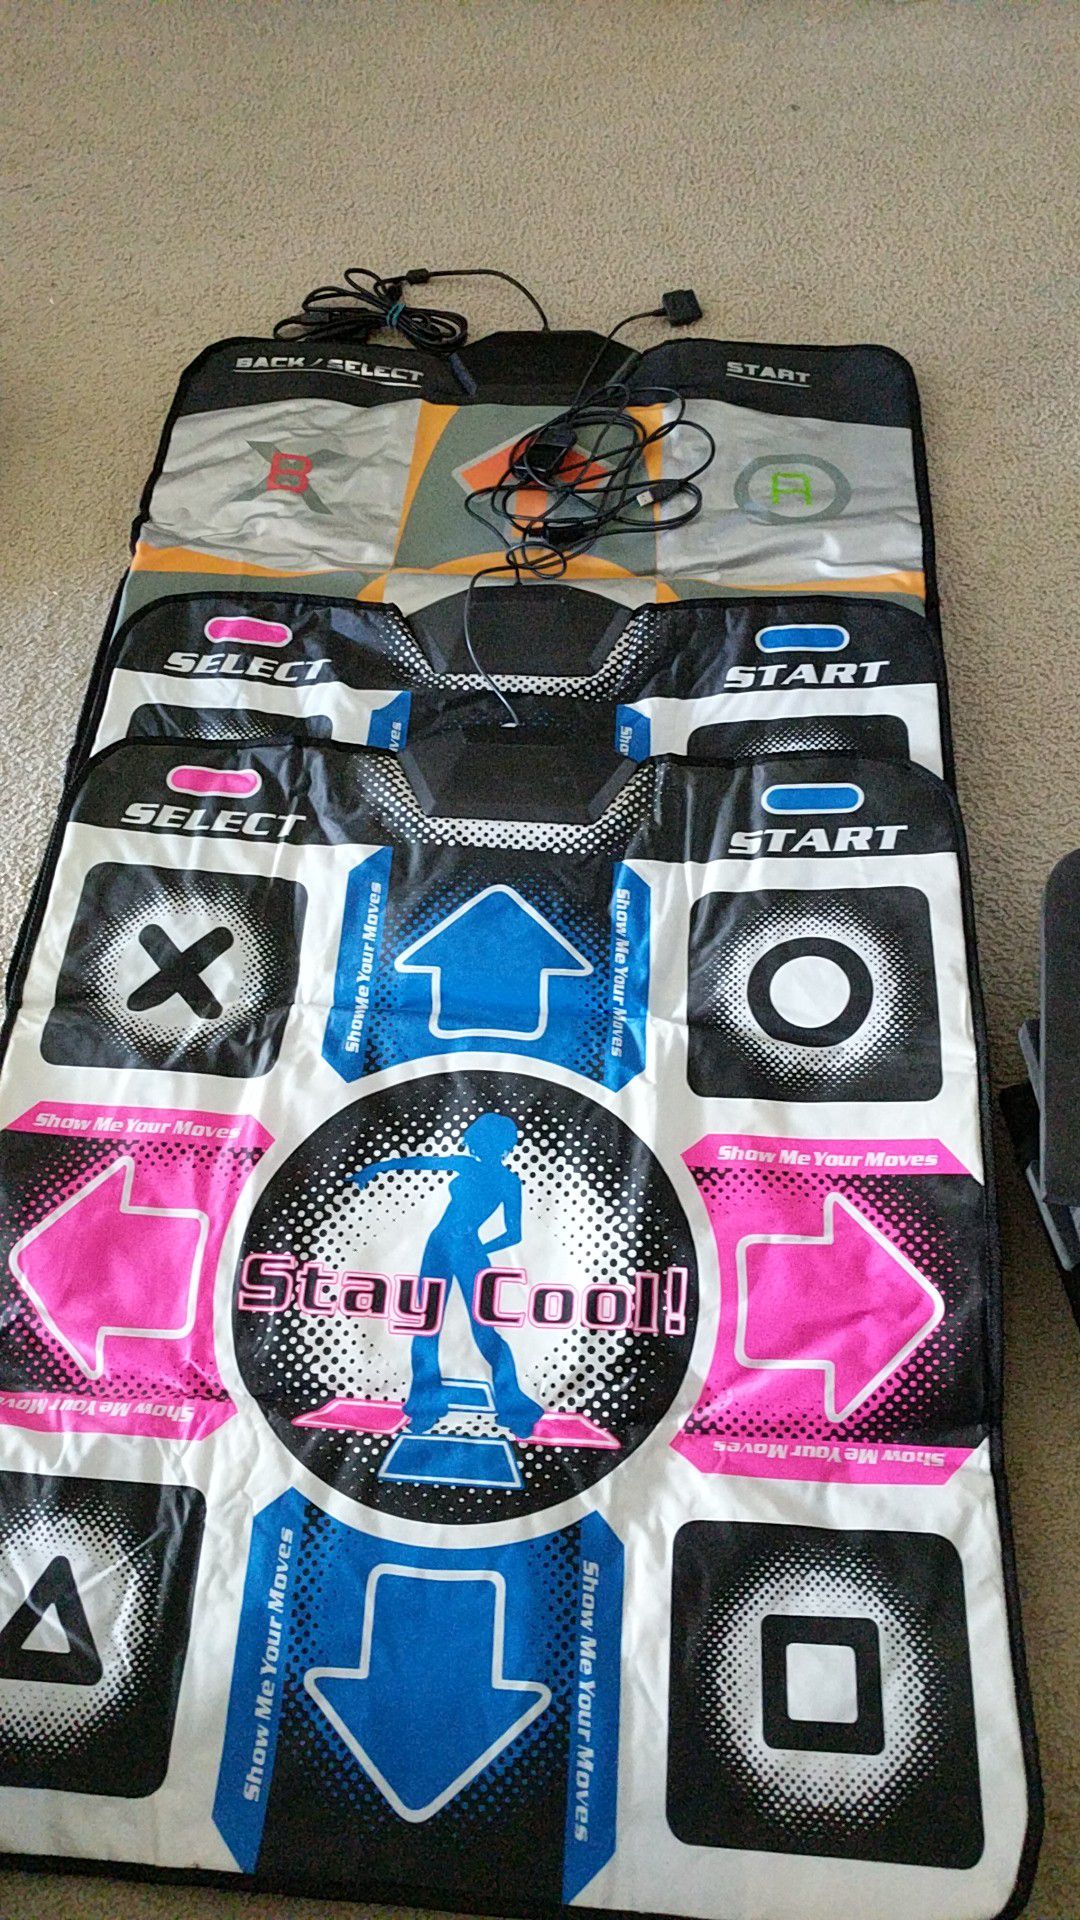 Ps2 PS3 and PS4 3 DDR mats dance dance revolution for PS3 or PS4